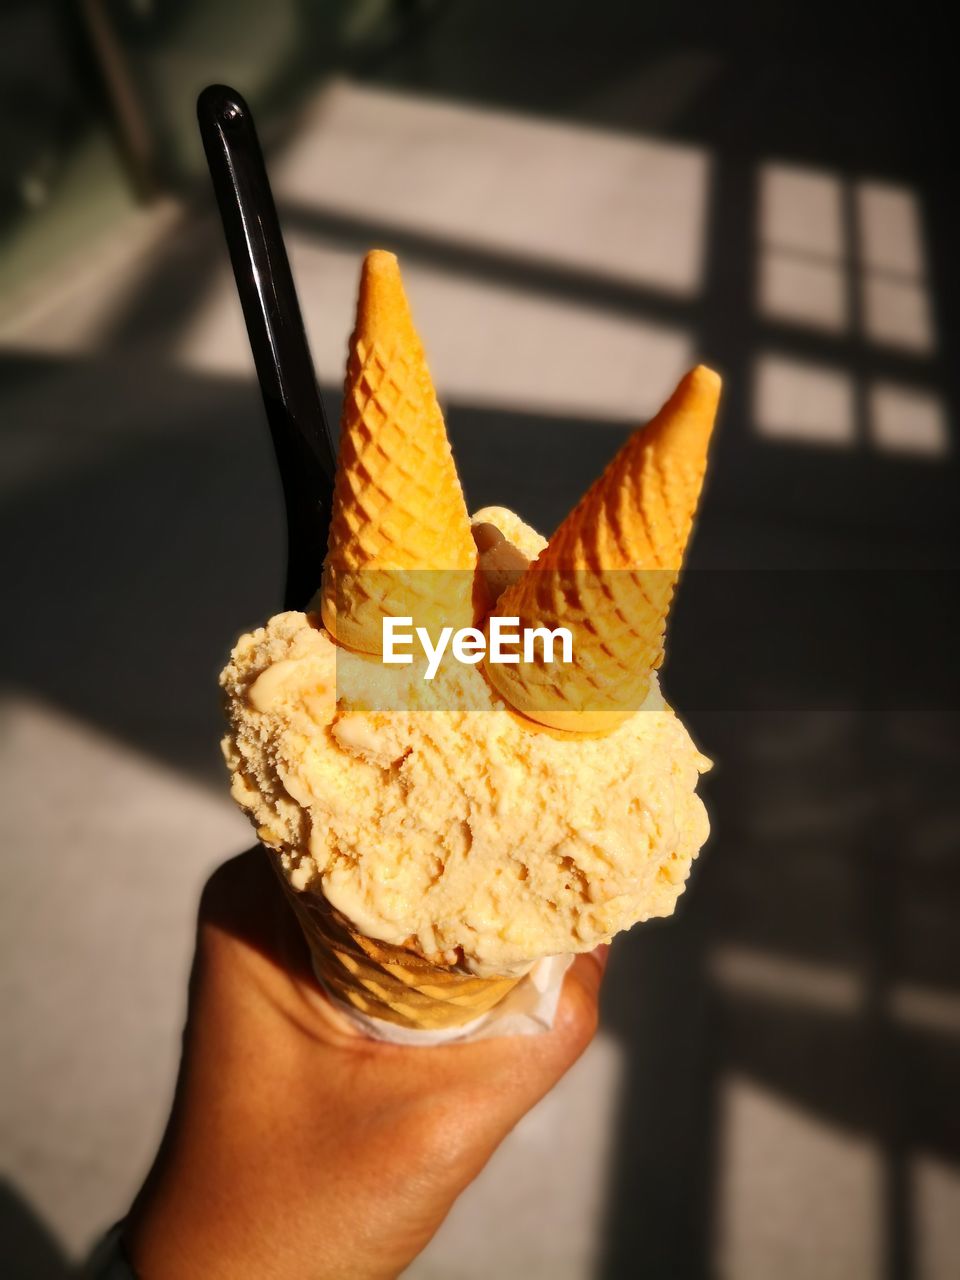 CROPPED IMAGE OF HAND HOLDING ICE CREAM CONE